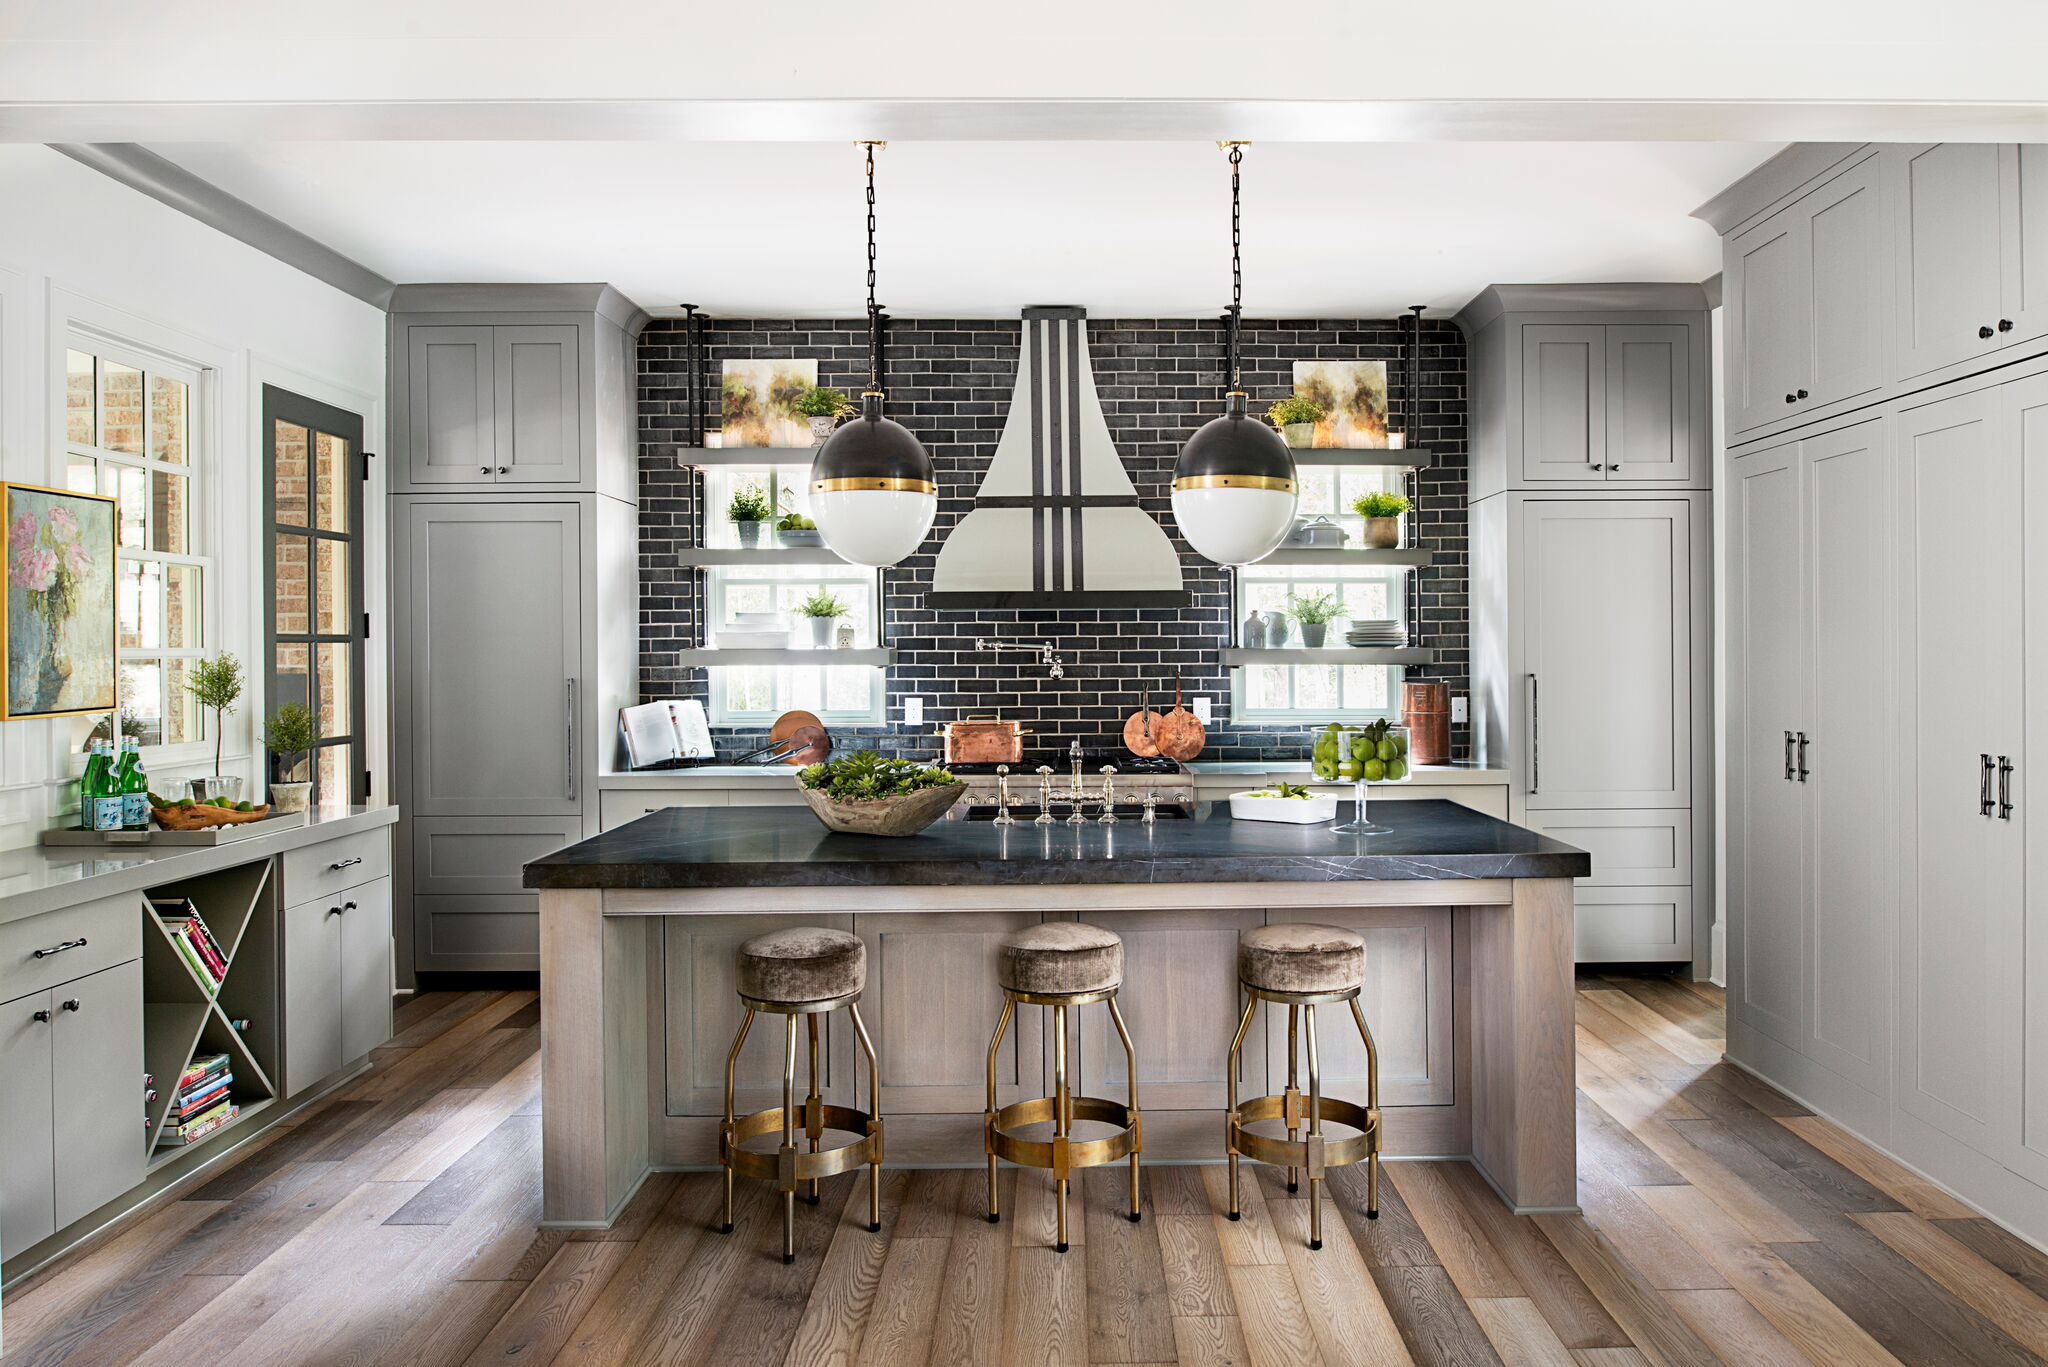 3 Navy Blue Paint Options For Your Kitchen Cabinets